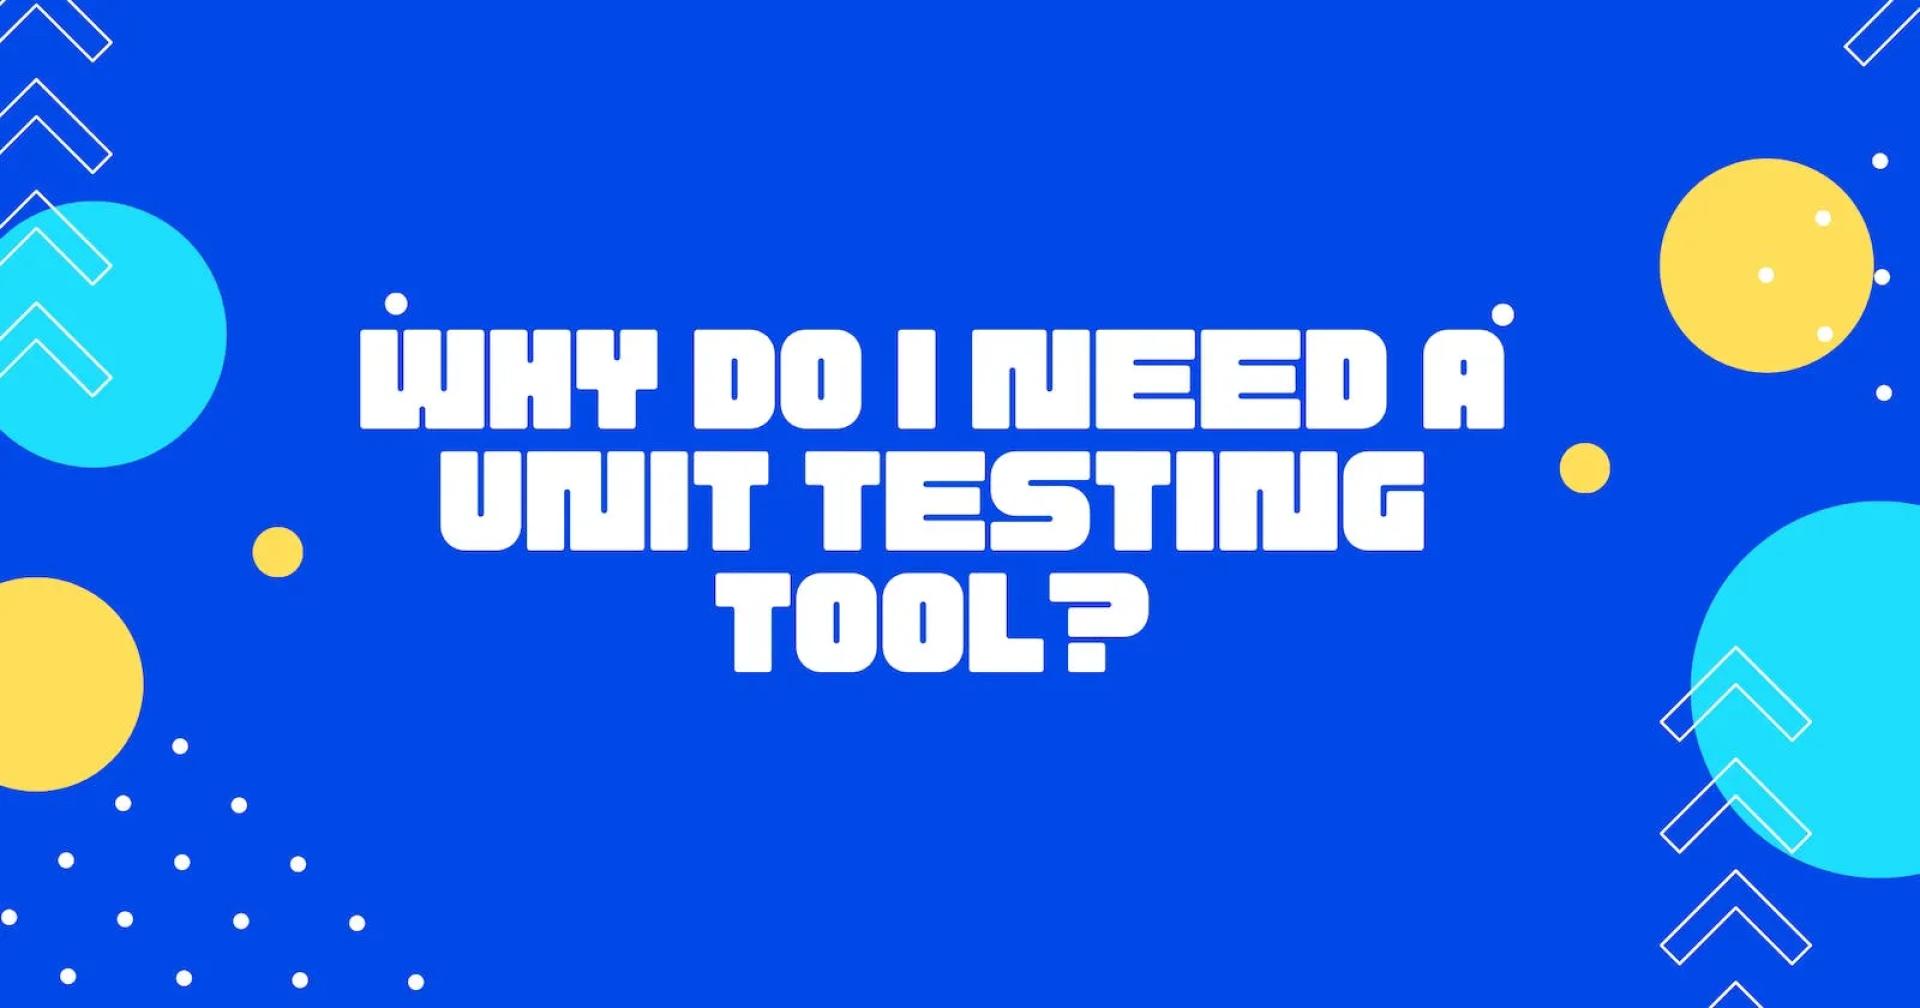 Why do I need a unit testing tool?